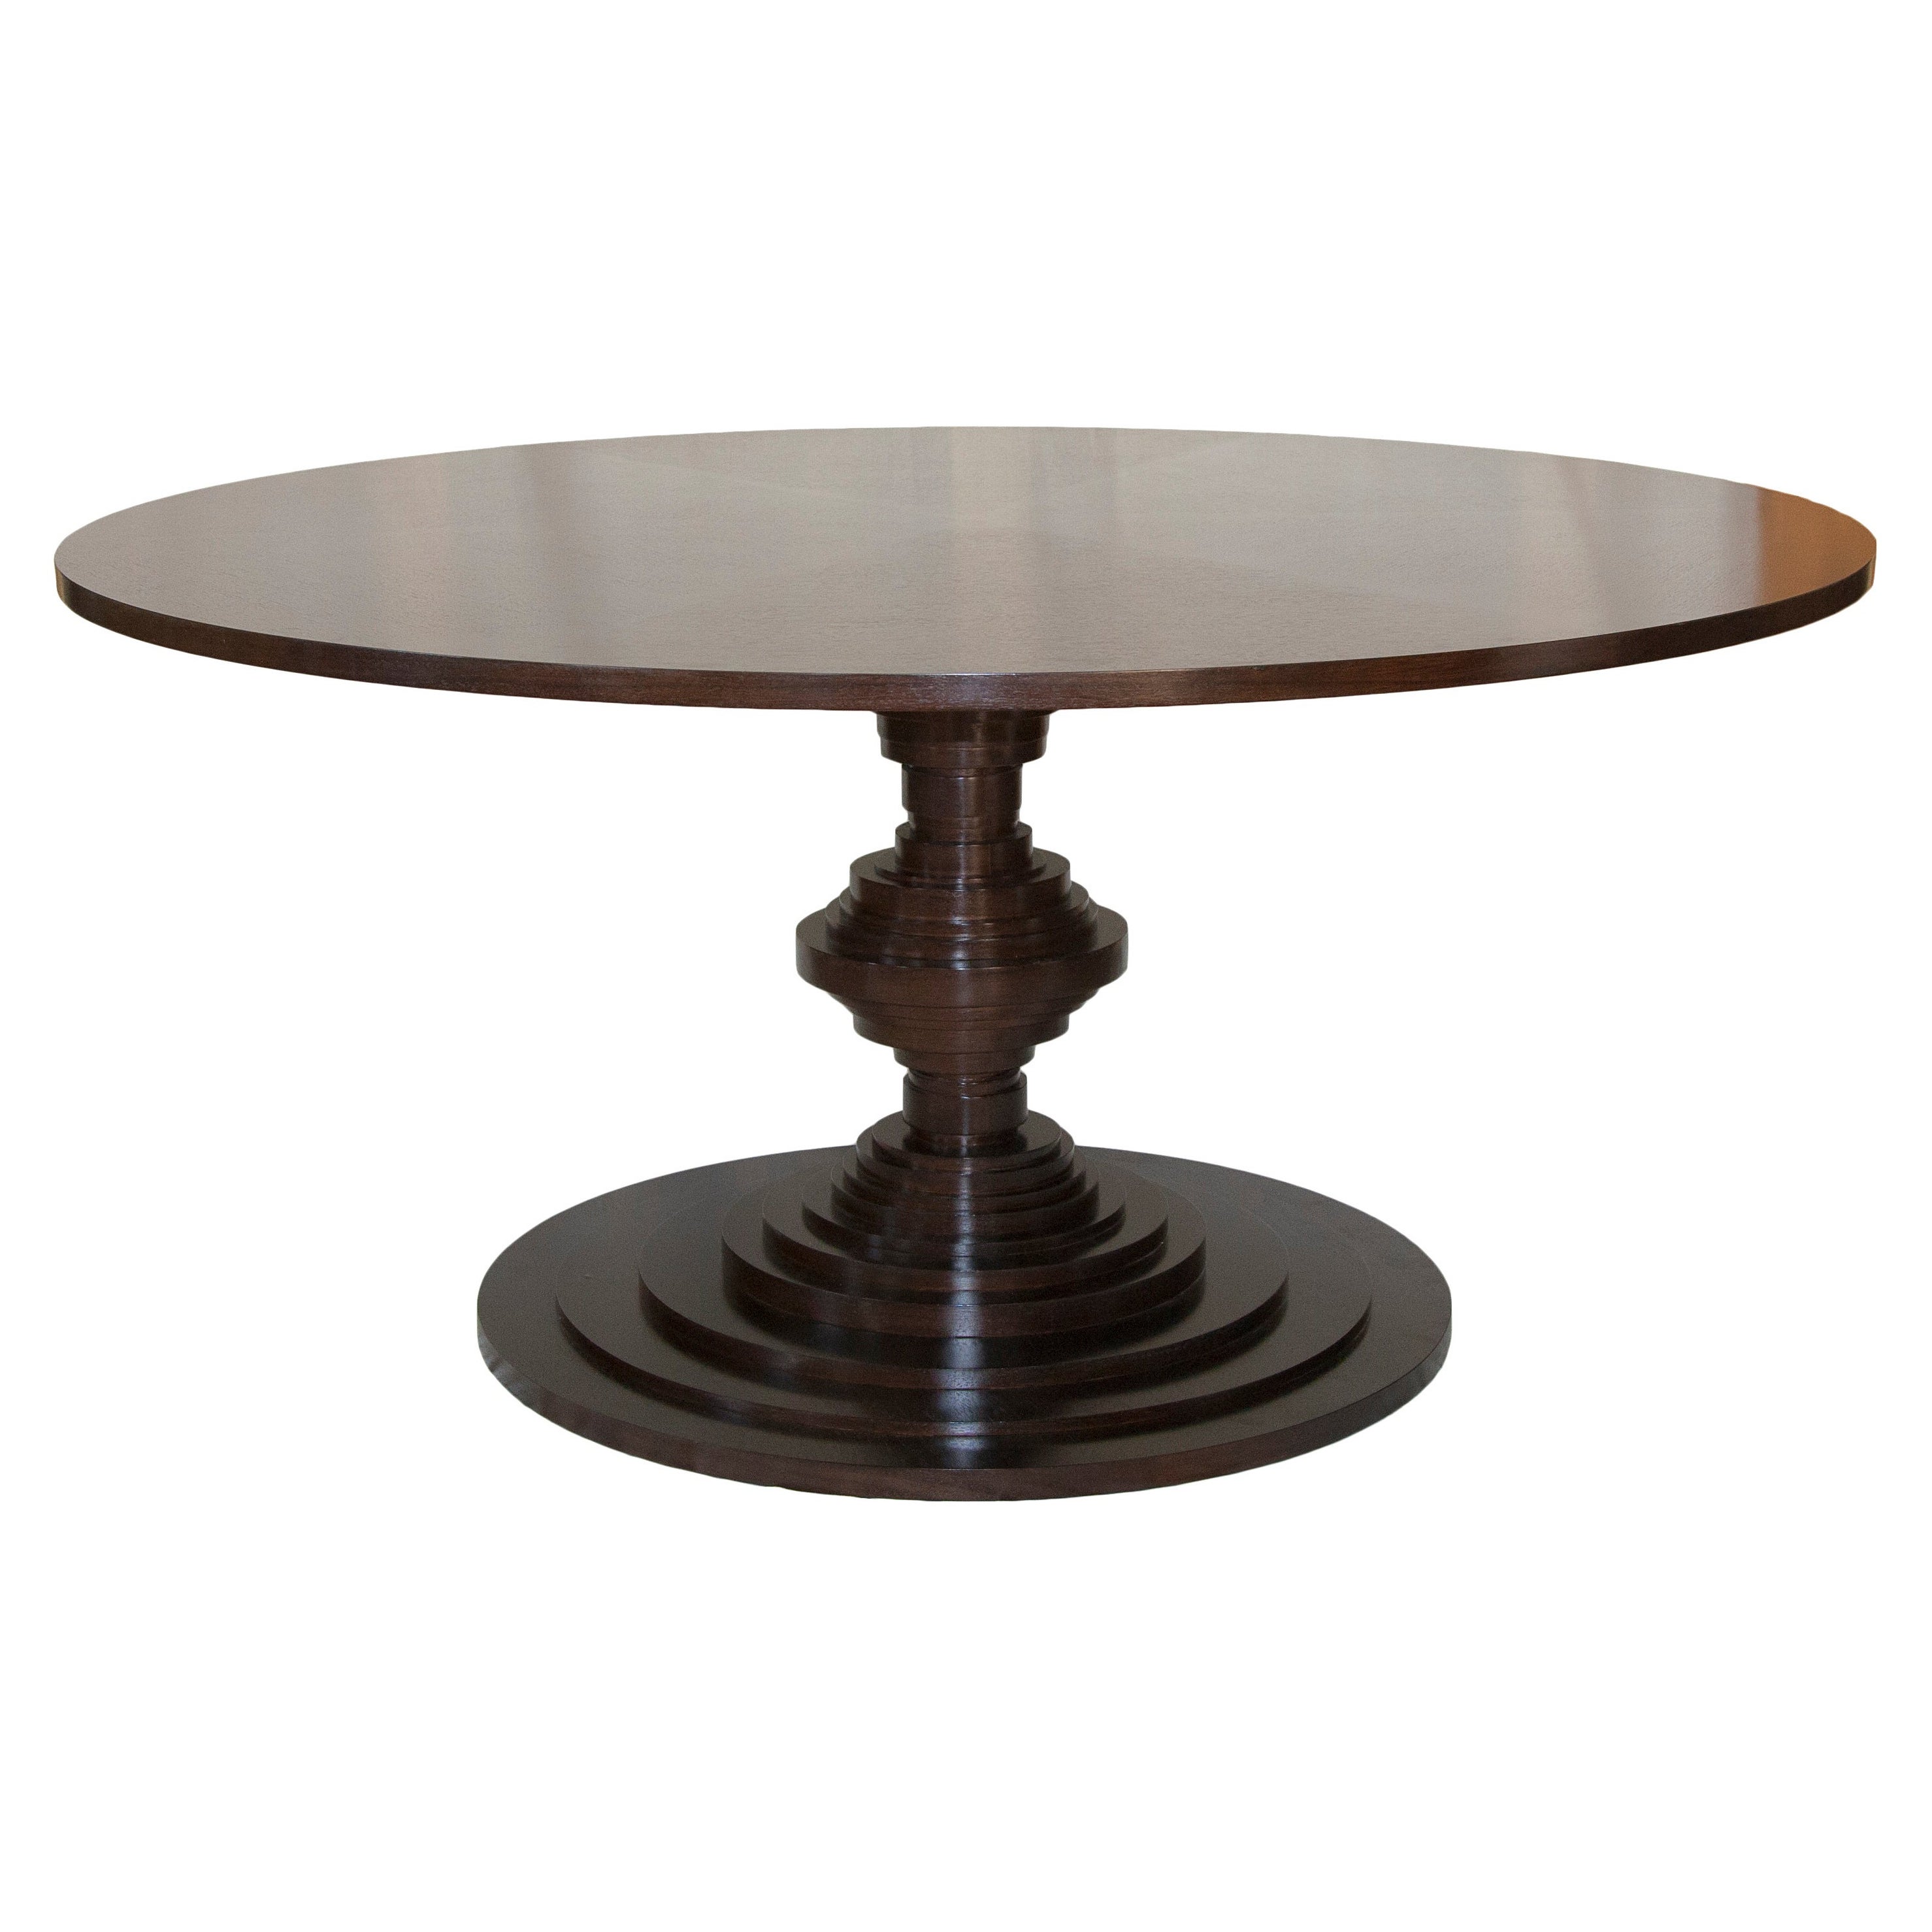 Walnut Dining Table with Stacked Discs